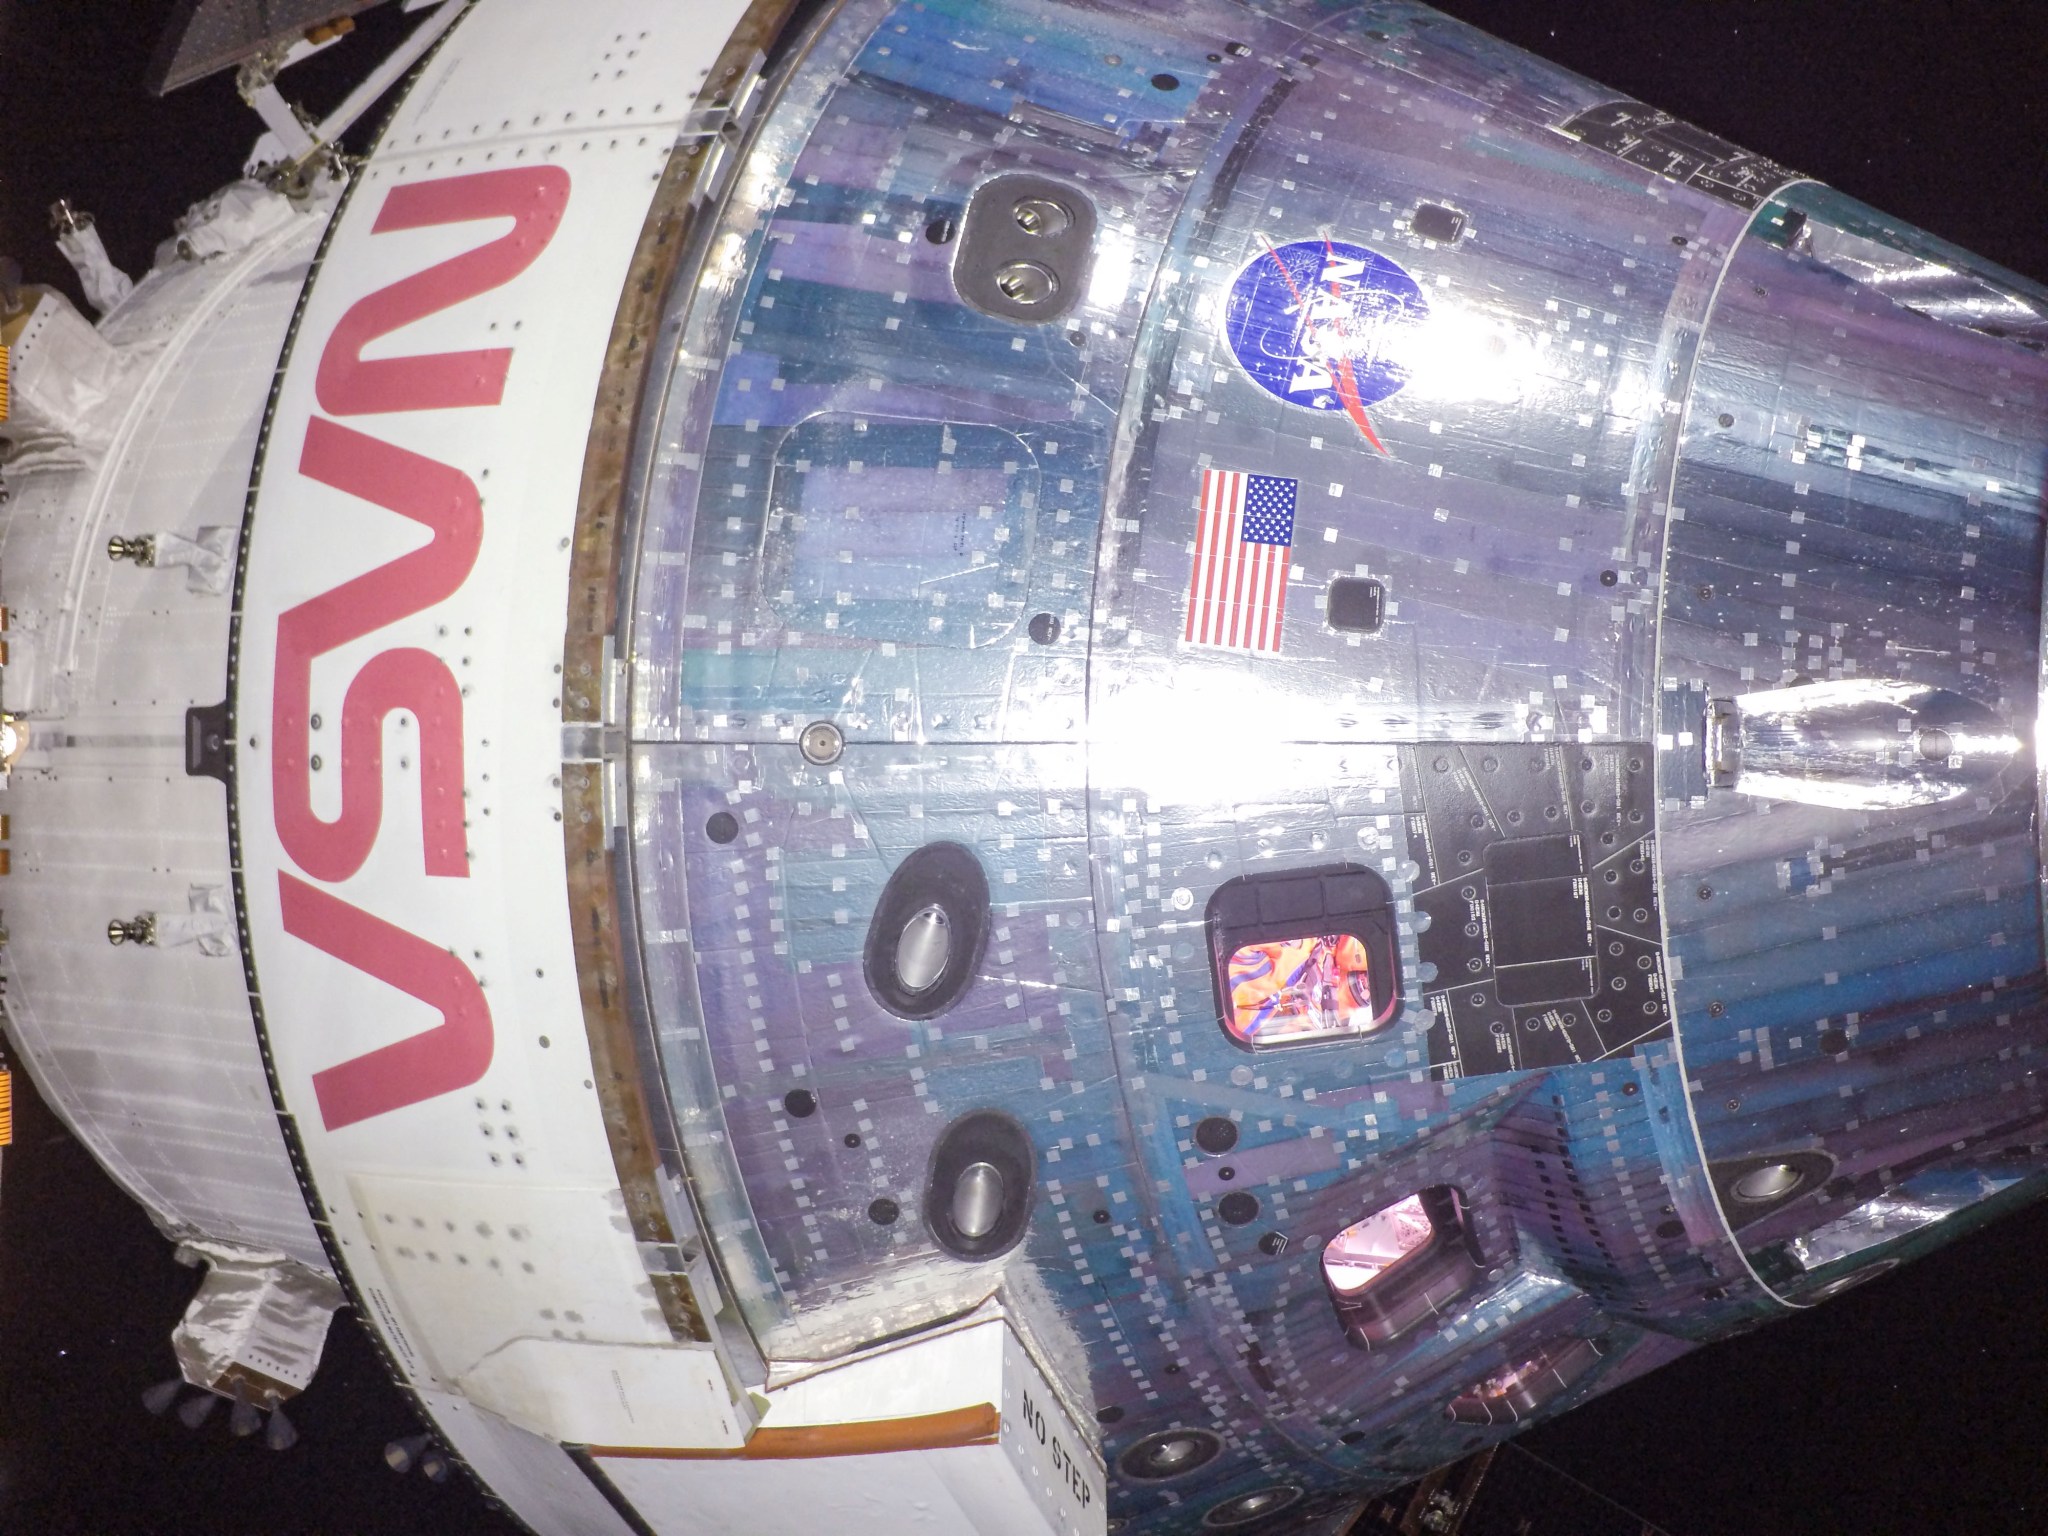 A close up view of the Orion in space. The orange spacesuit on Commander Moonikin Campos can be seen through one of the crew module's windows. The American flag on the body of the crew module and red NASA lettering can also be seen.